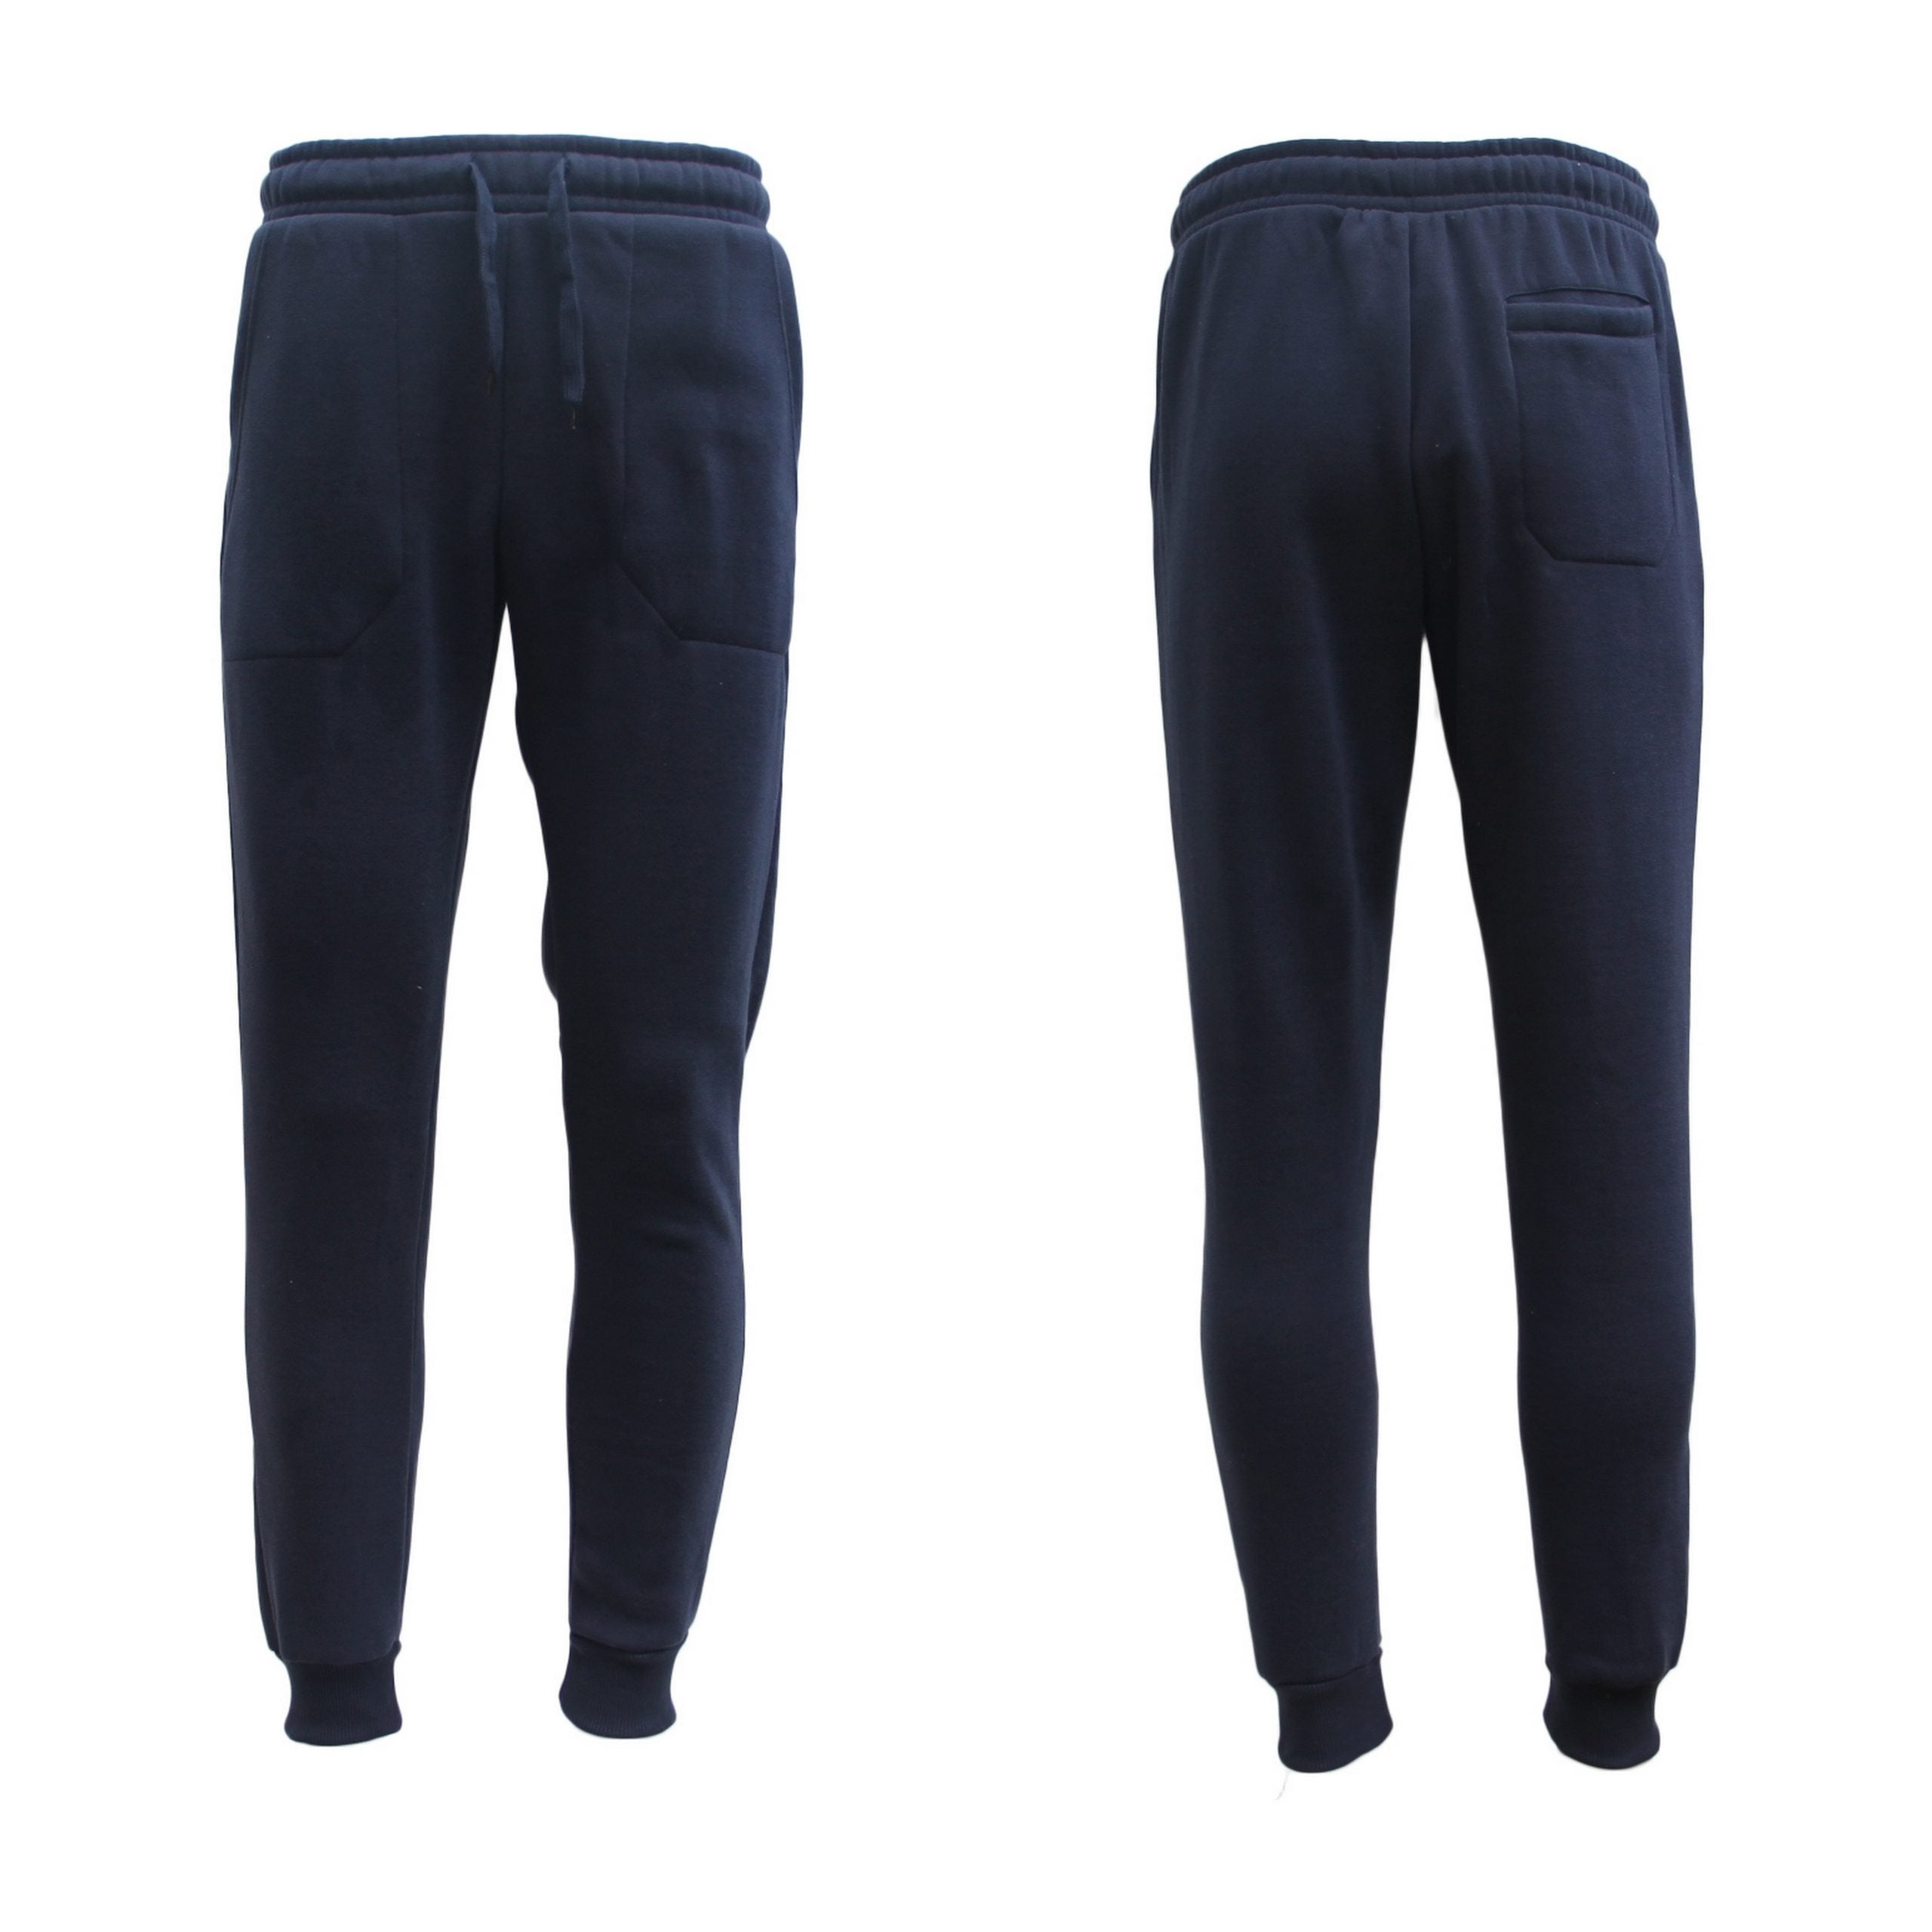 Mens Unisex Fleece Lined Sweat Track Pants Suit Casual Trackies Slim Cuff XS-6XL, Navy, XL